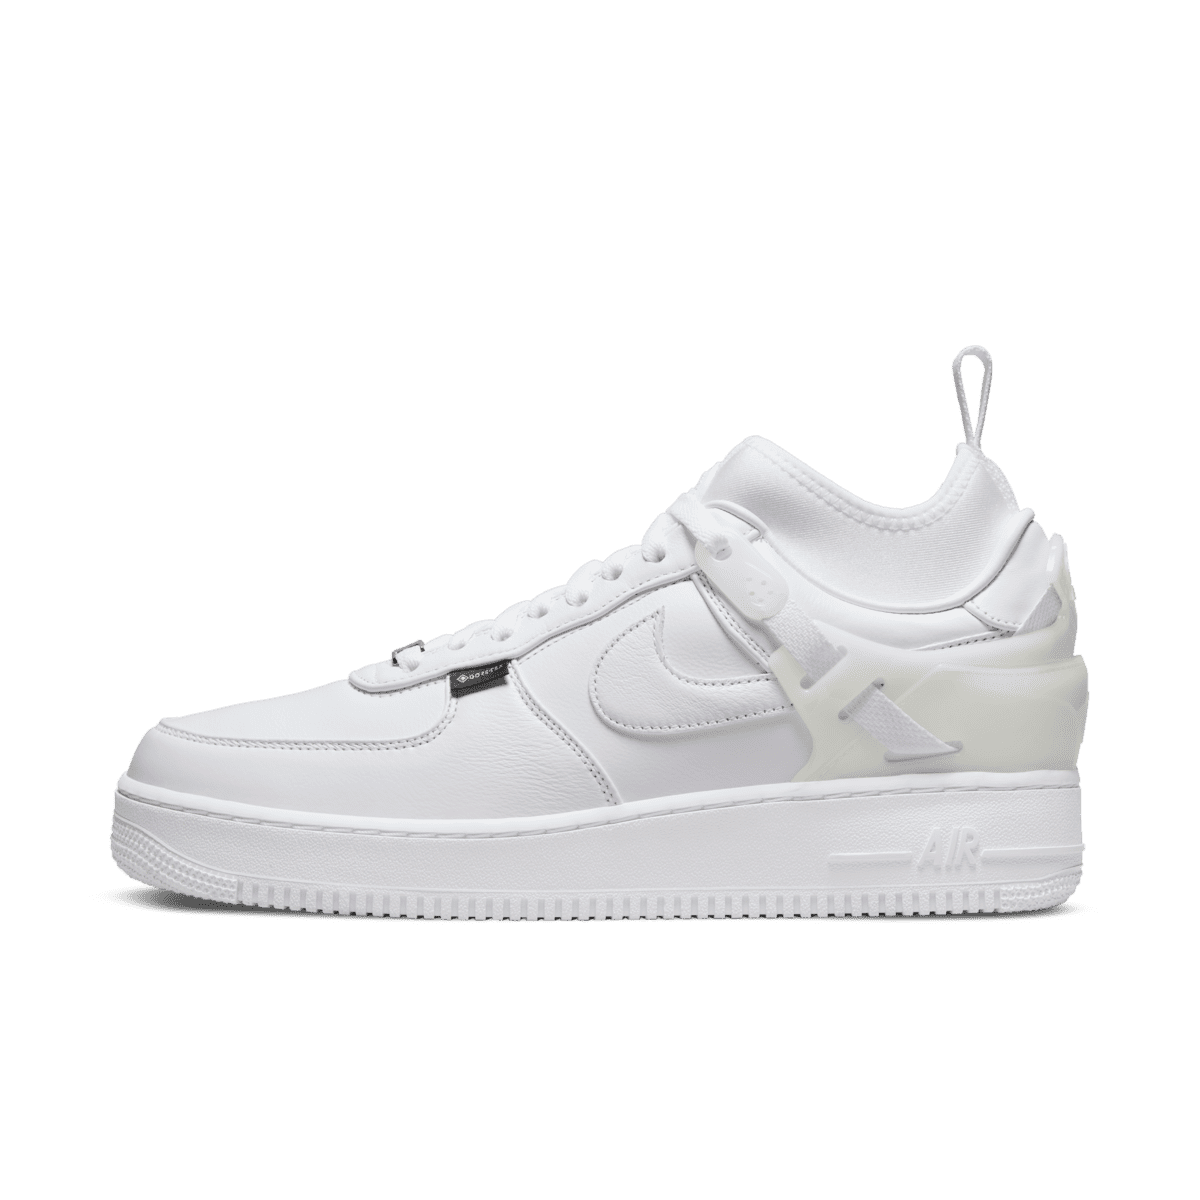 UNDERCOVER x Nike Air Force 1 Low 'White' DQ7558-101